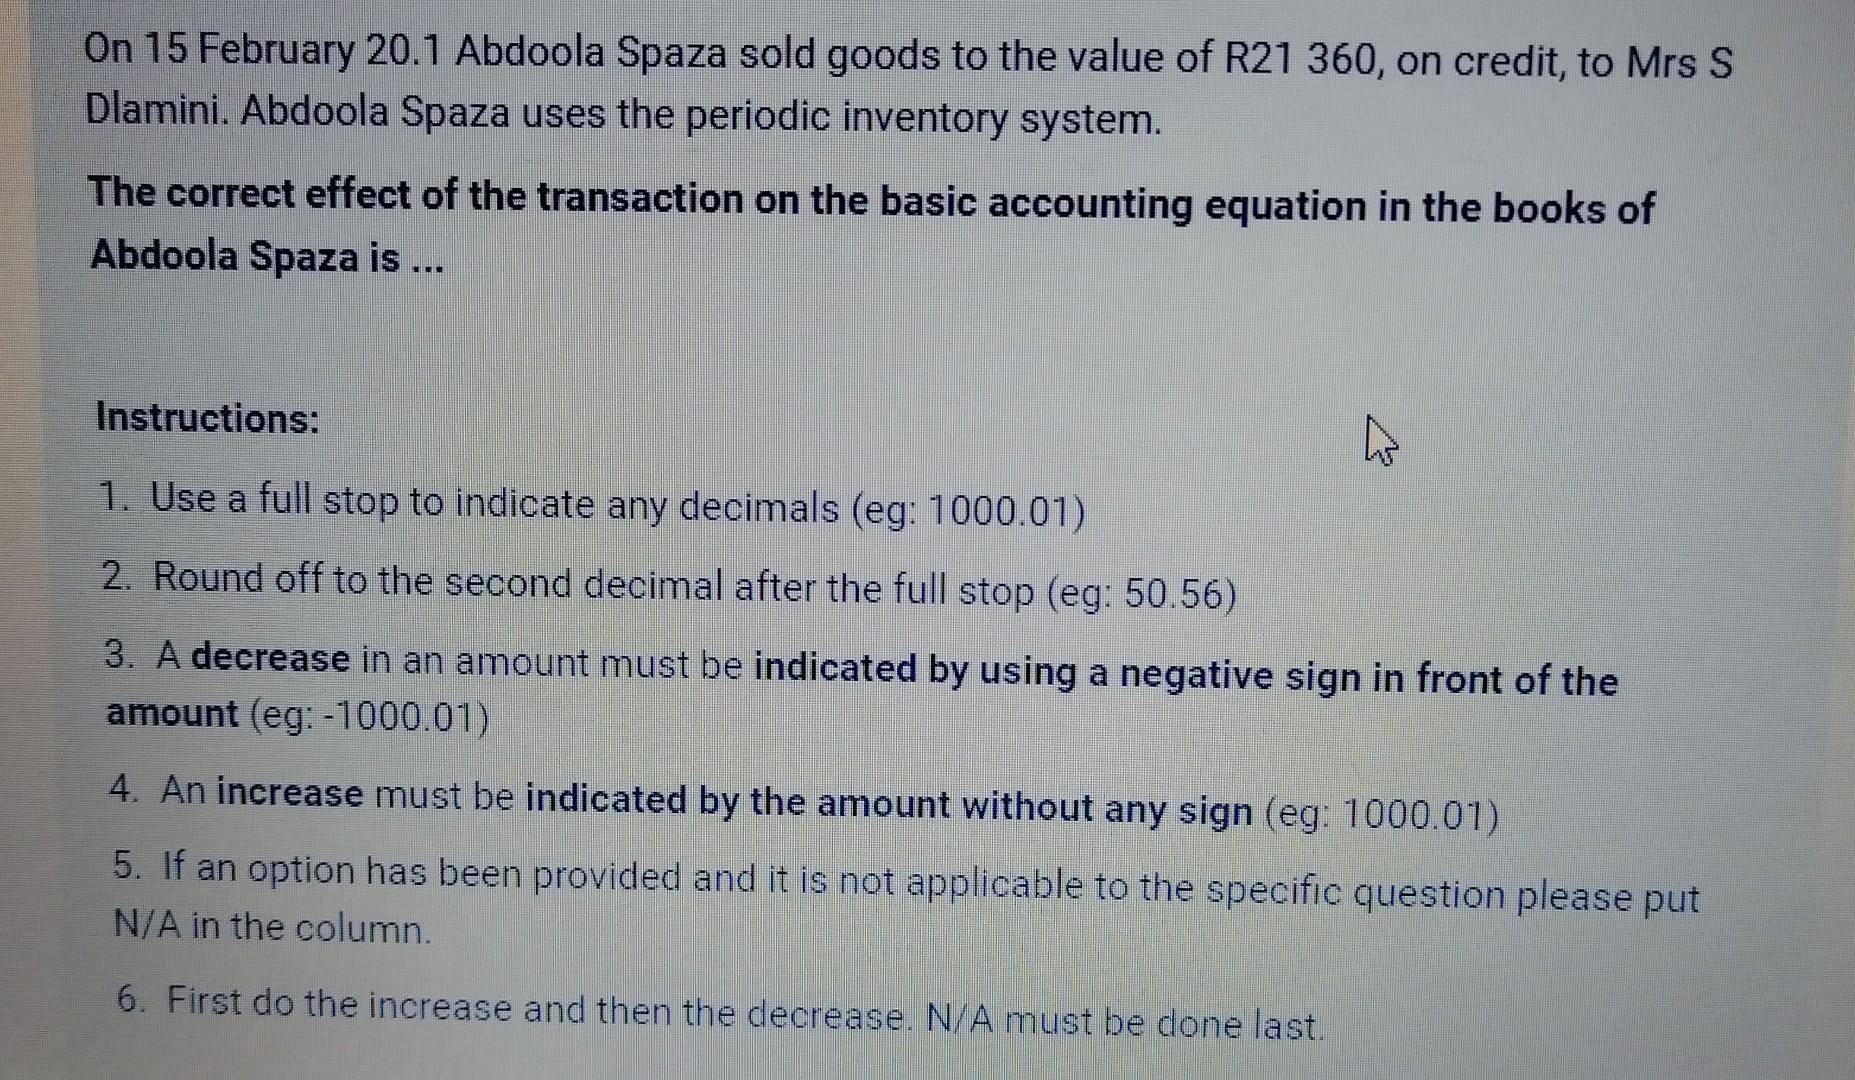 On 15 February 20.1 Abdoola Spaza sold goods to the value of R21 360, on credit, to Mrs S Dlamini. Abdoola